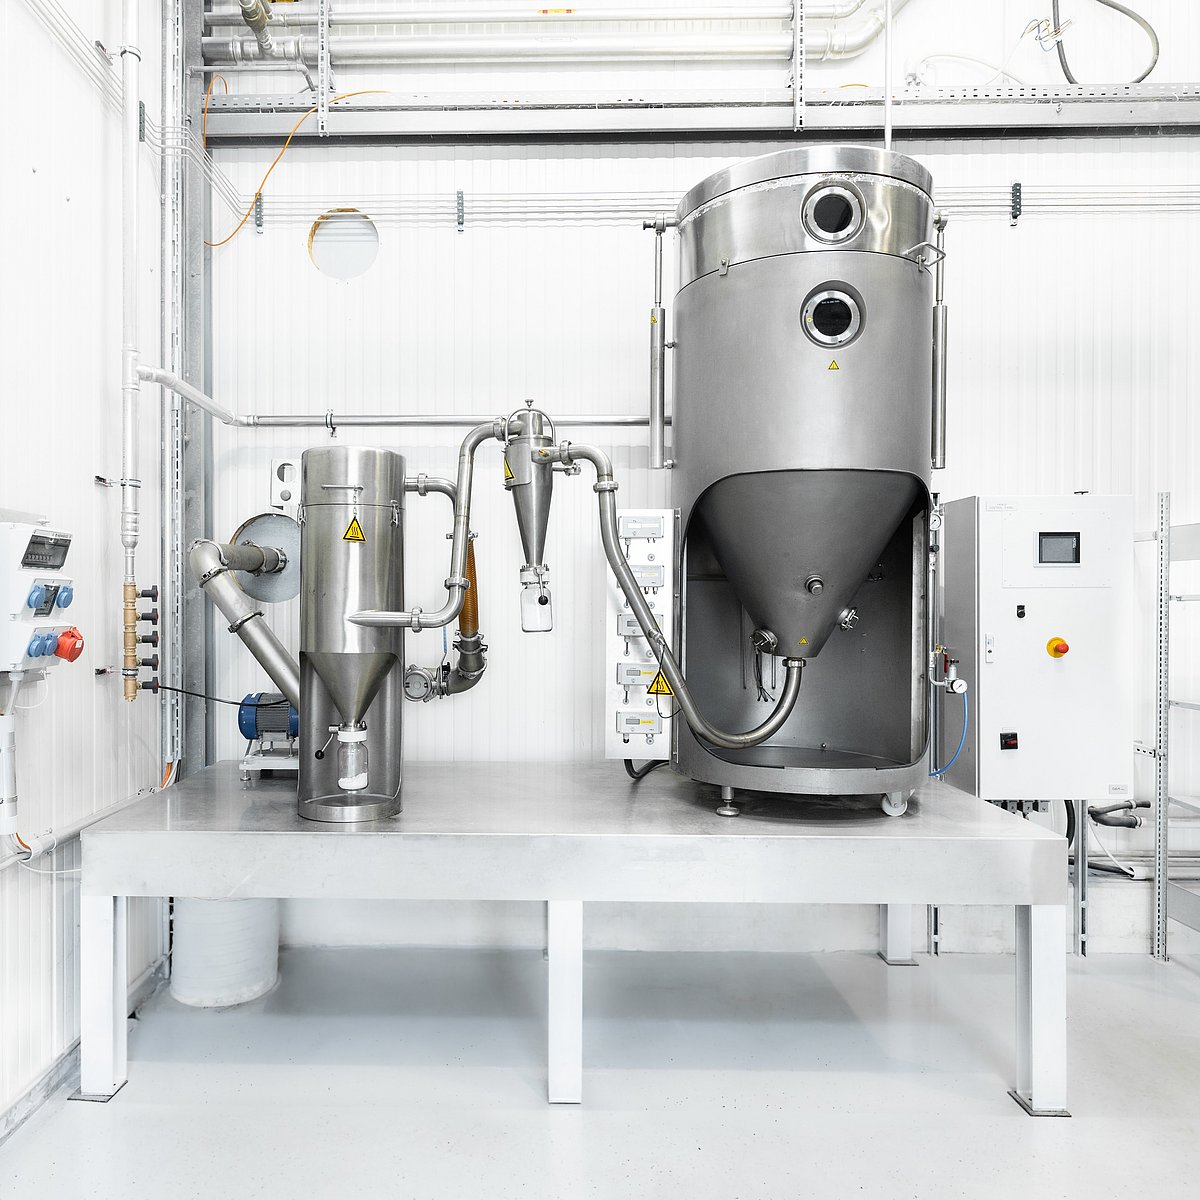 Laboratory-scale spray dryer for trials and product development